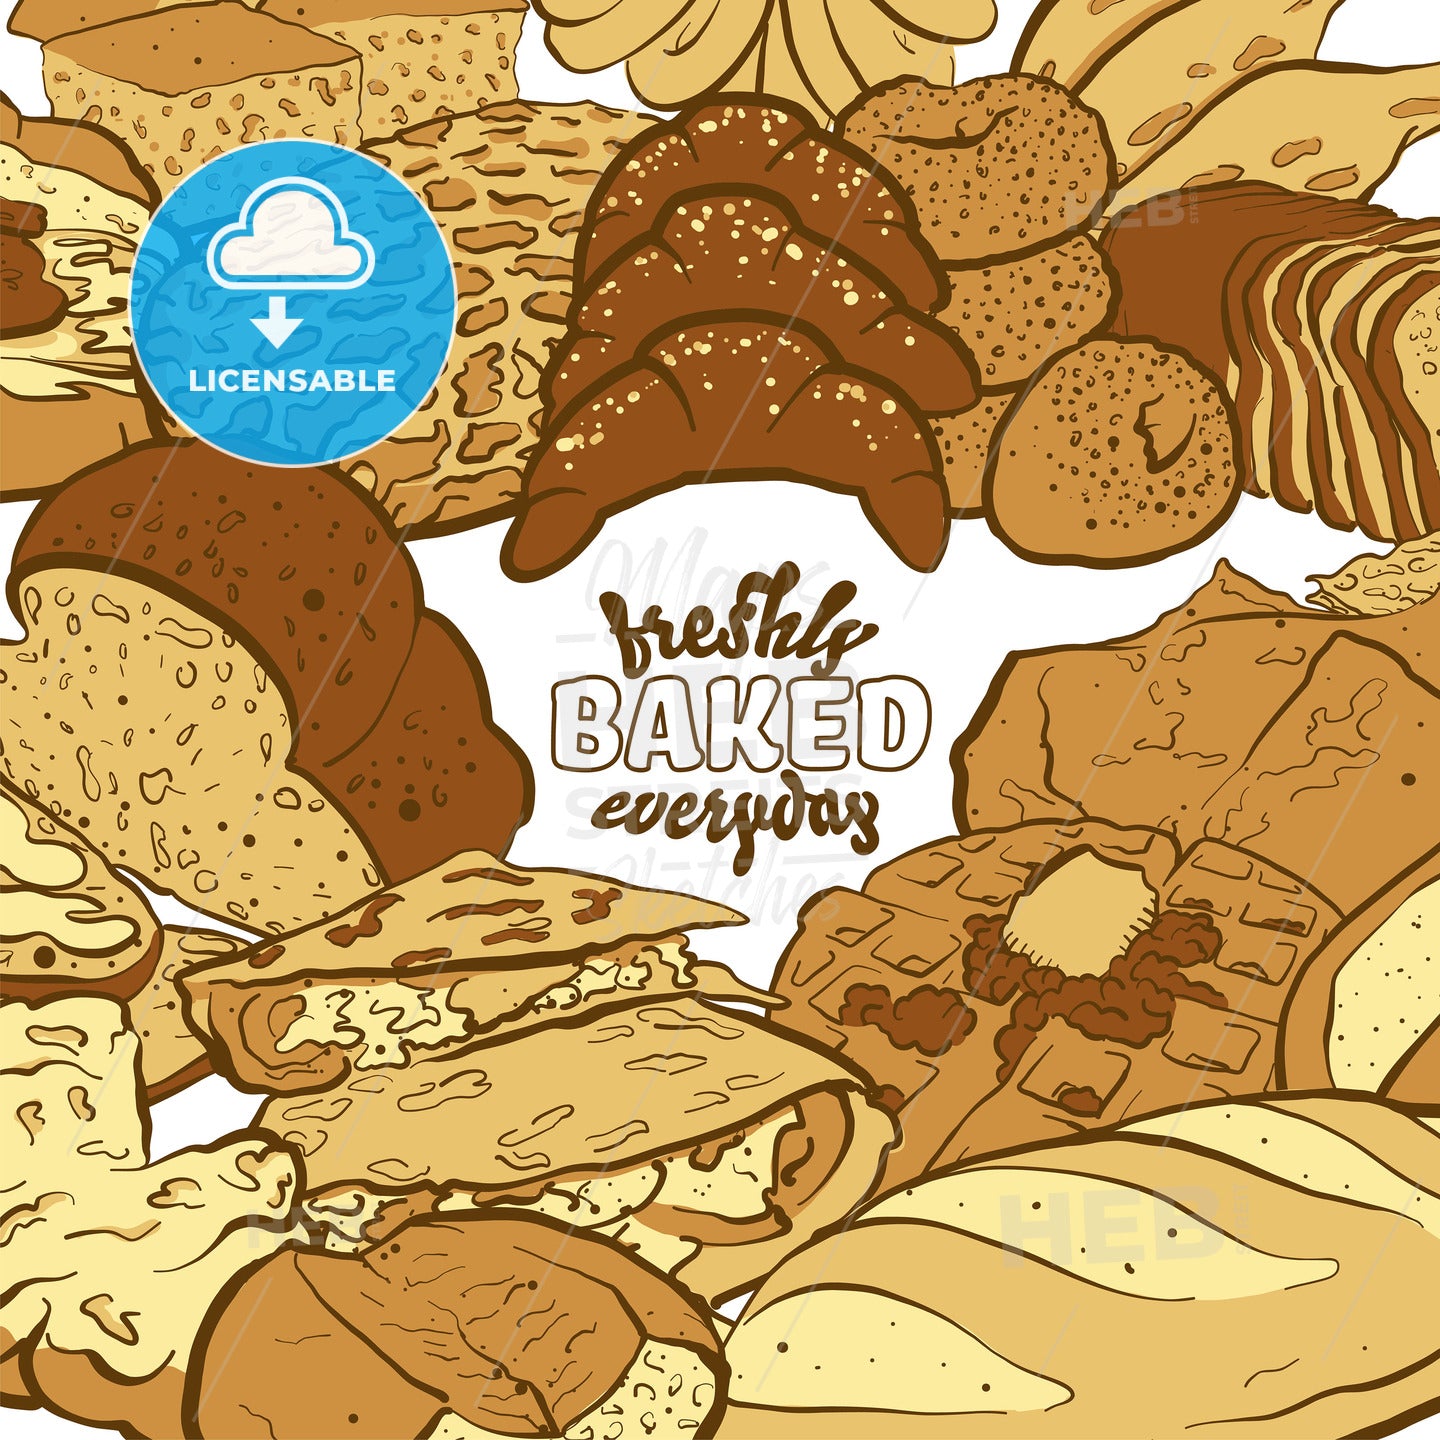 Freshly baked everyday label with various types of bread on white – instant download